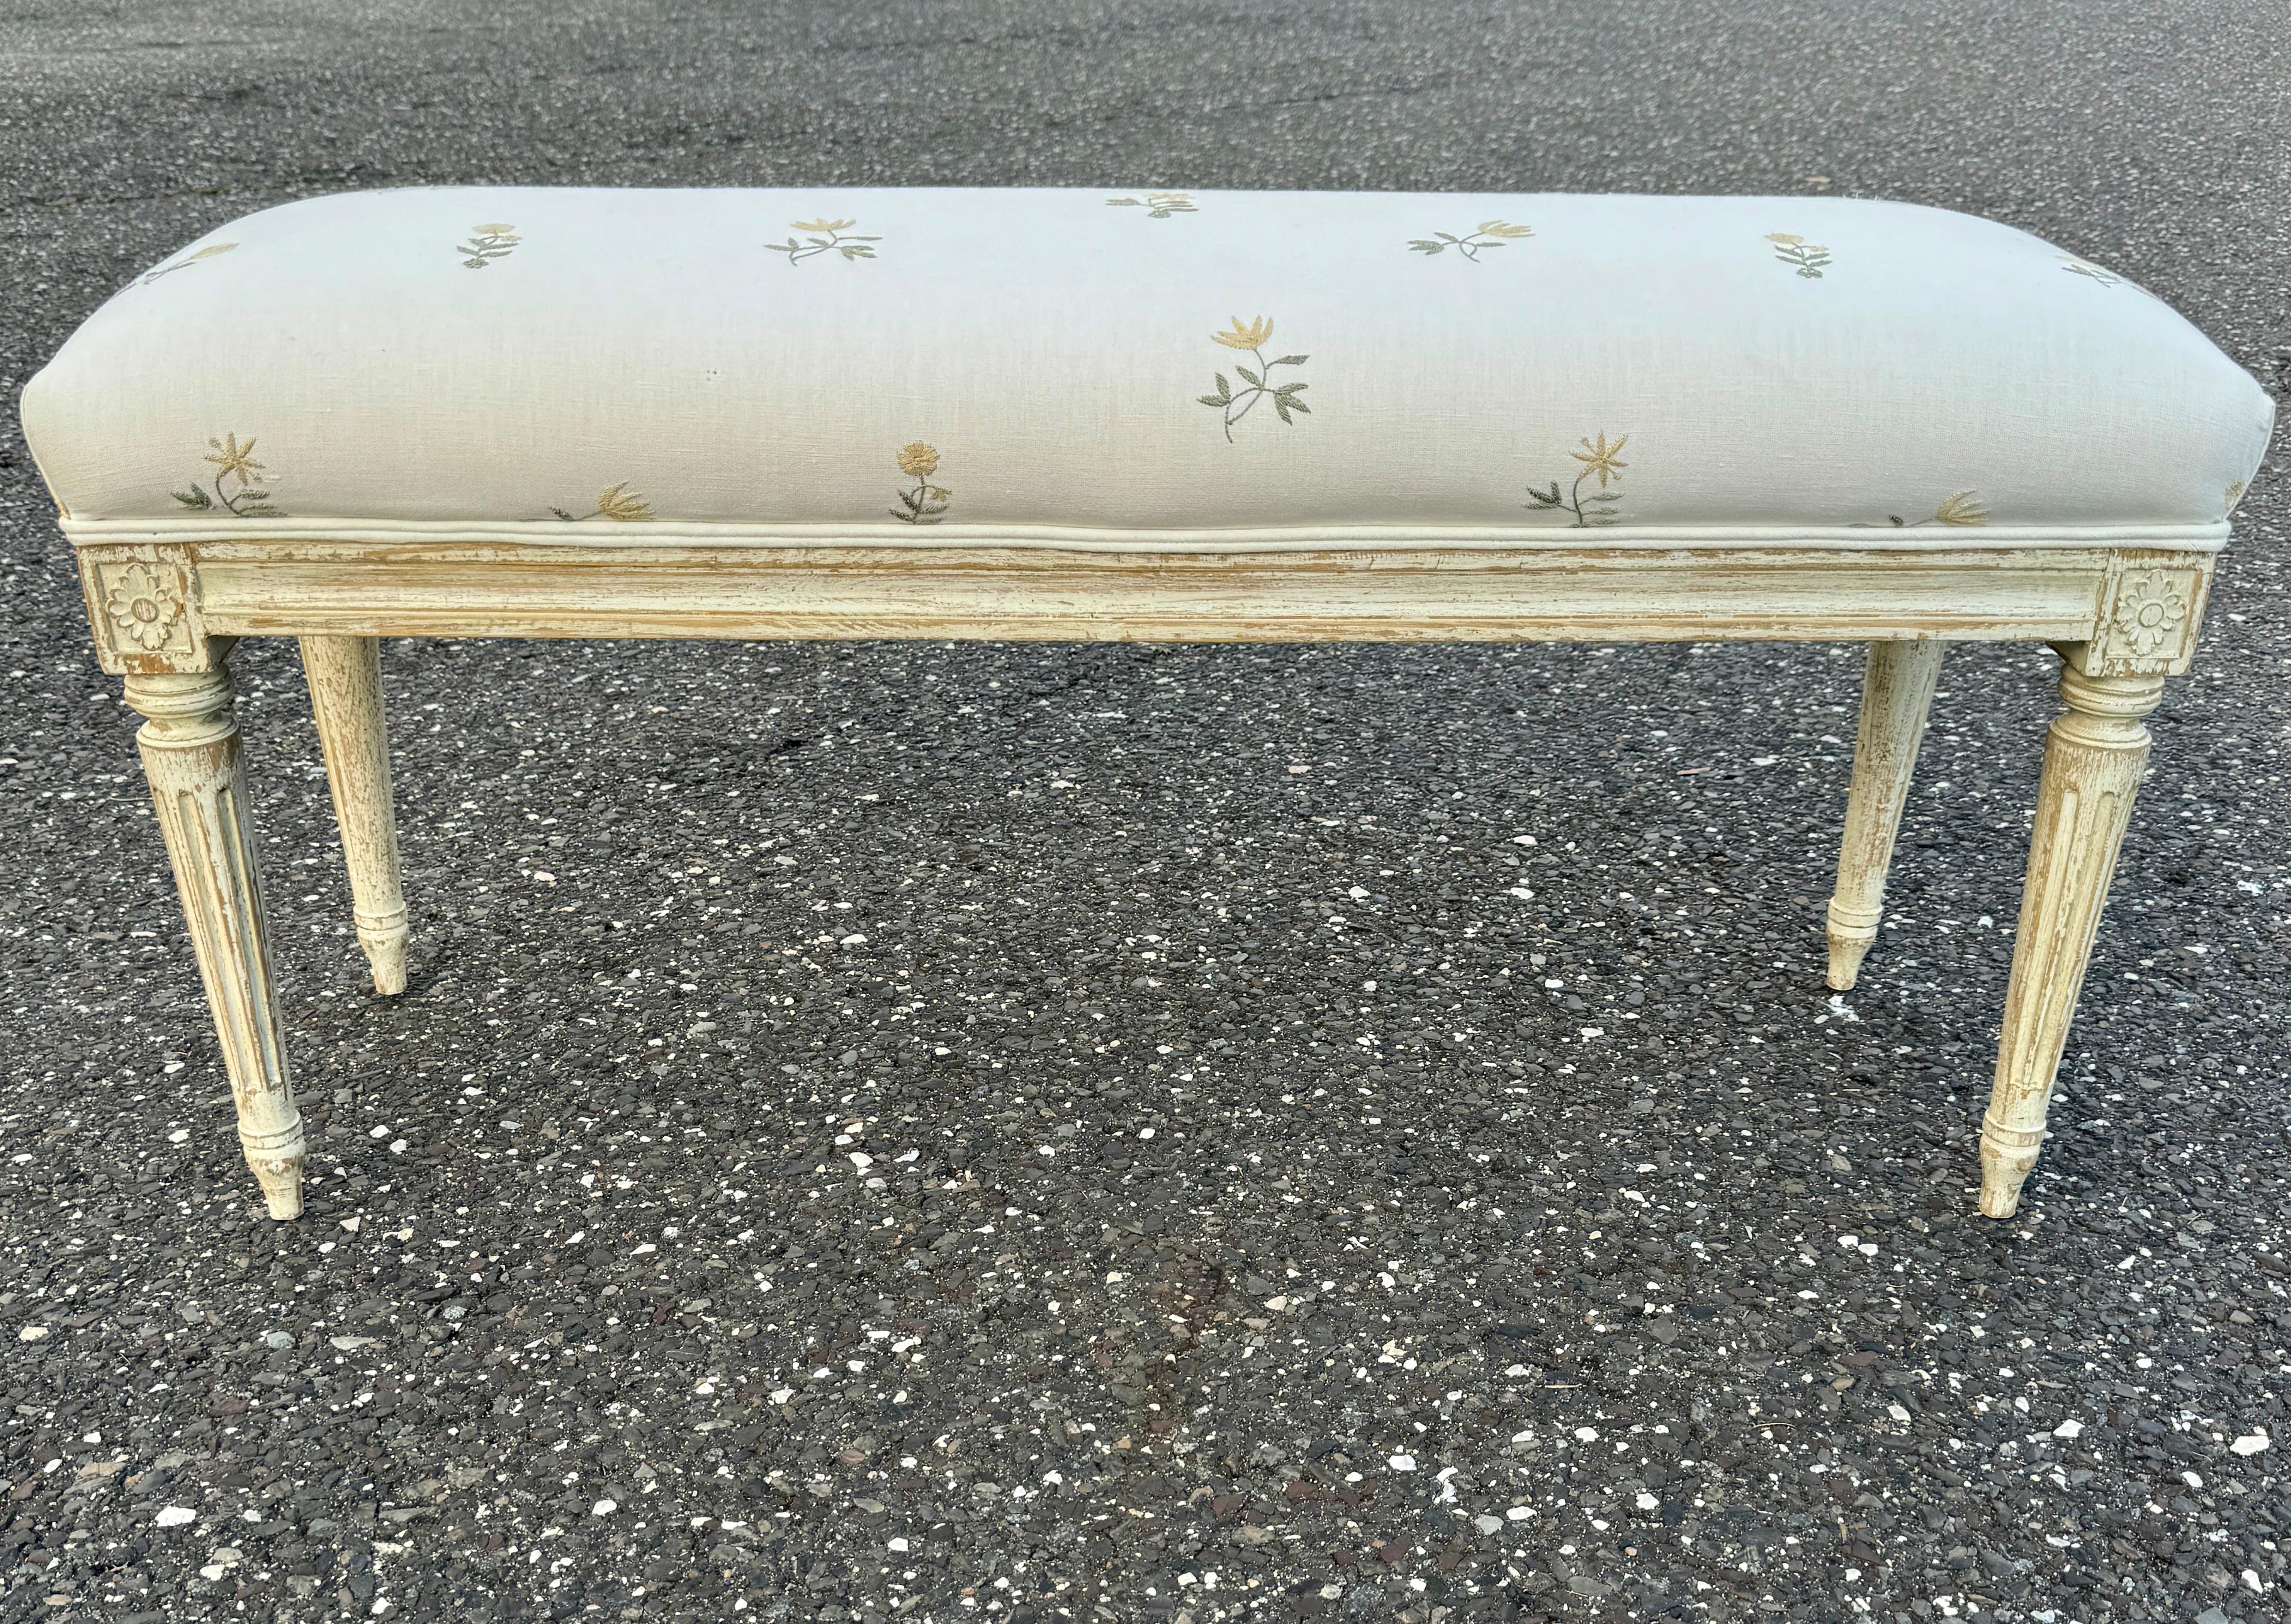 Swedish hand carved, solid wood and hand painted Gustavian bench upholstered in a floral silk blend fabric. Wonderful addition to any style home, used formally or informally in an entrance area, living room or bedroom. This bench is certainly a very